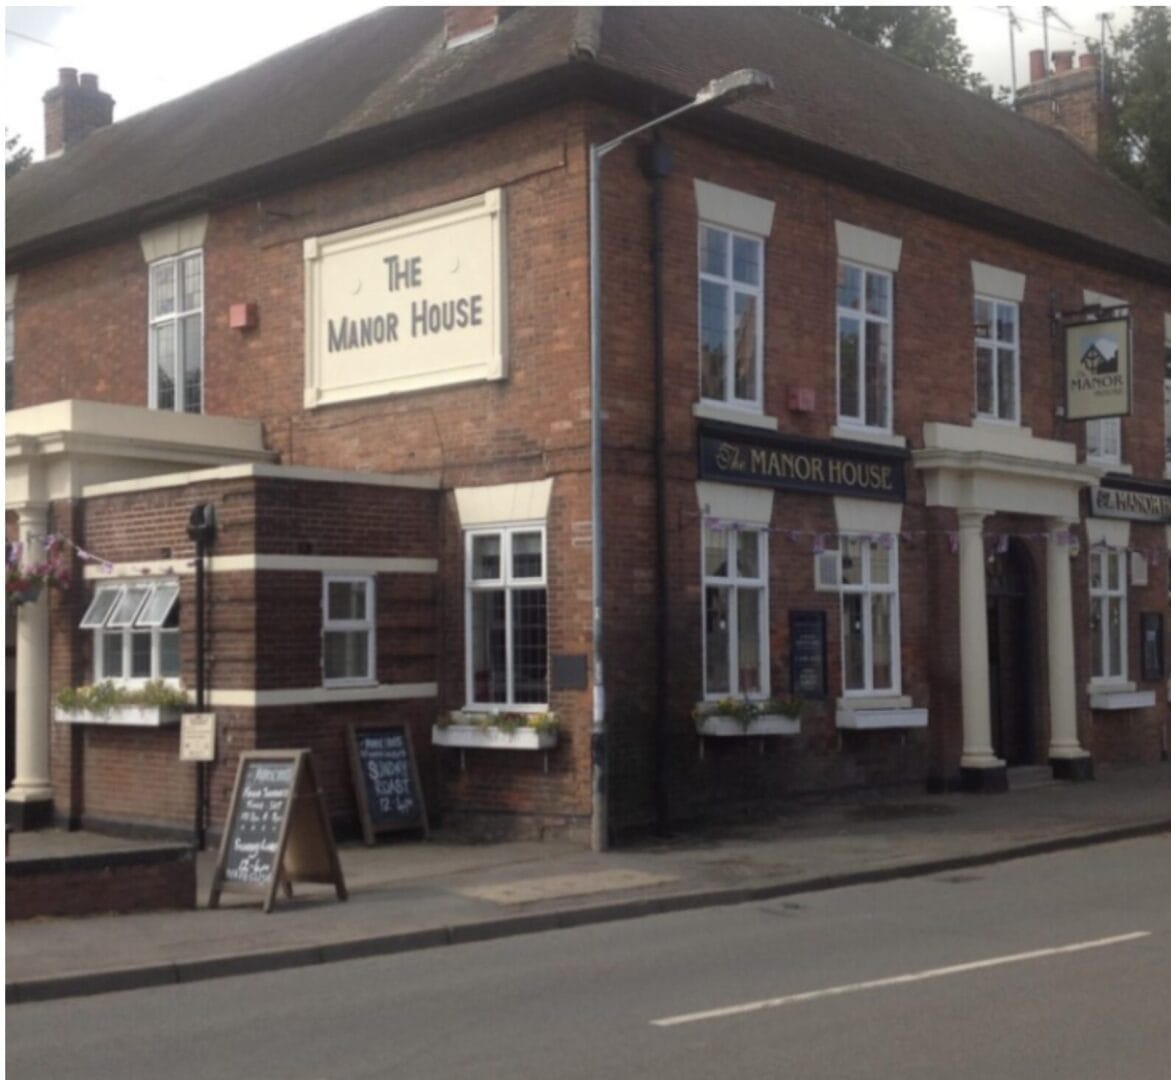 Let A Pub In Coventry - Run The Manor House !